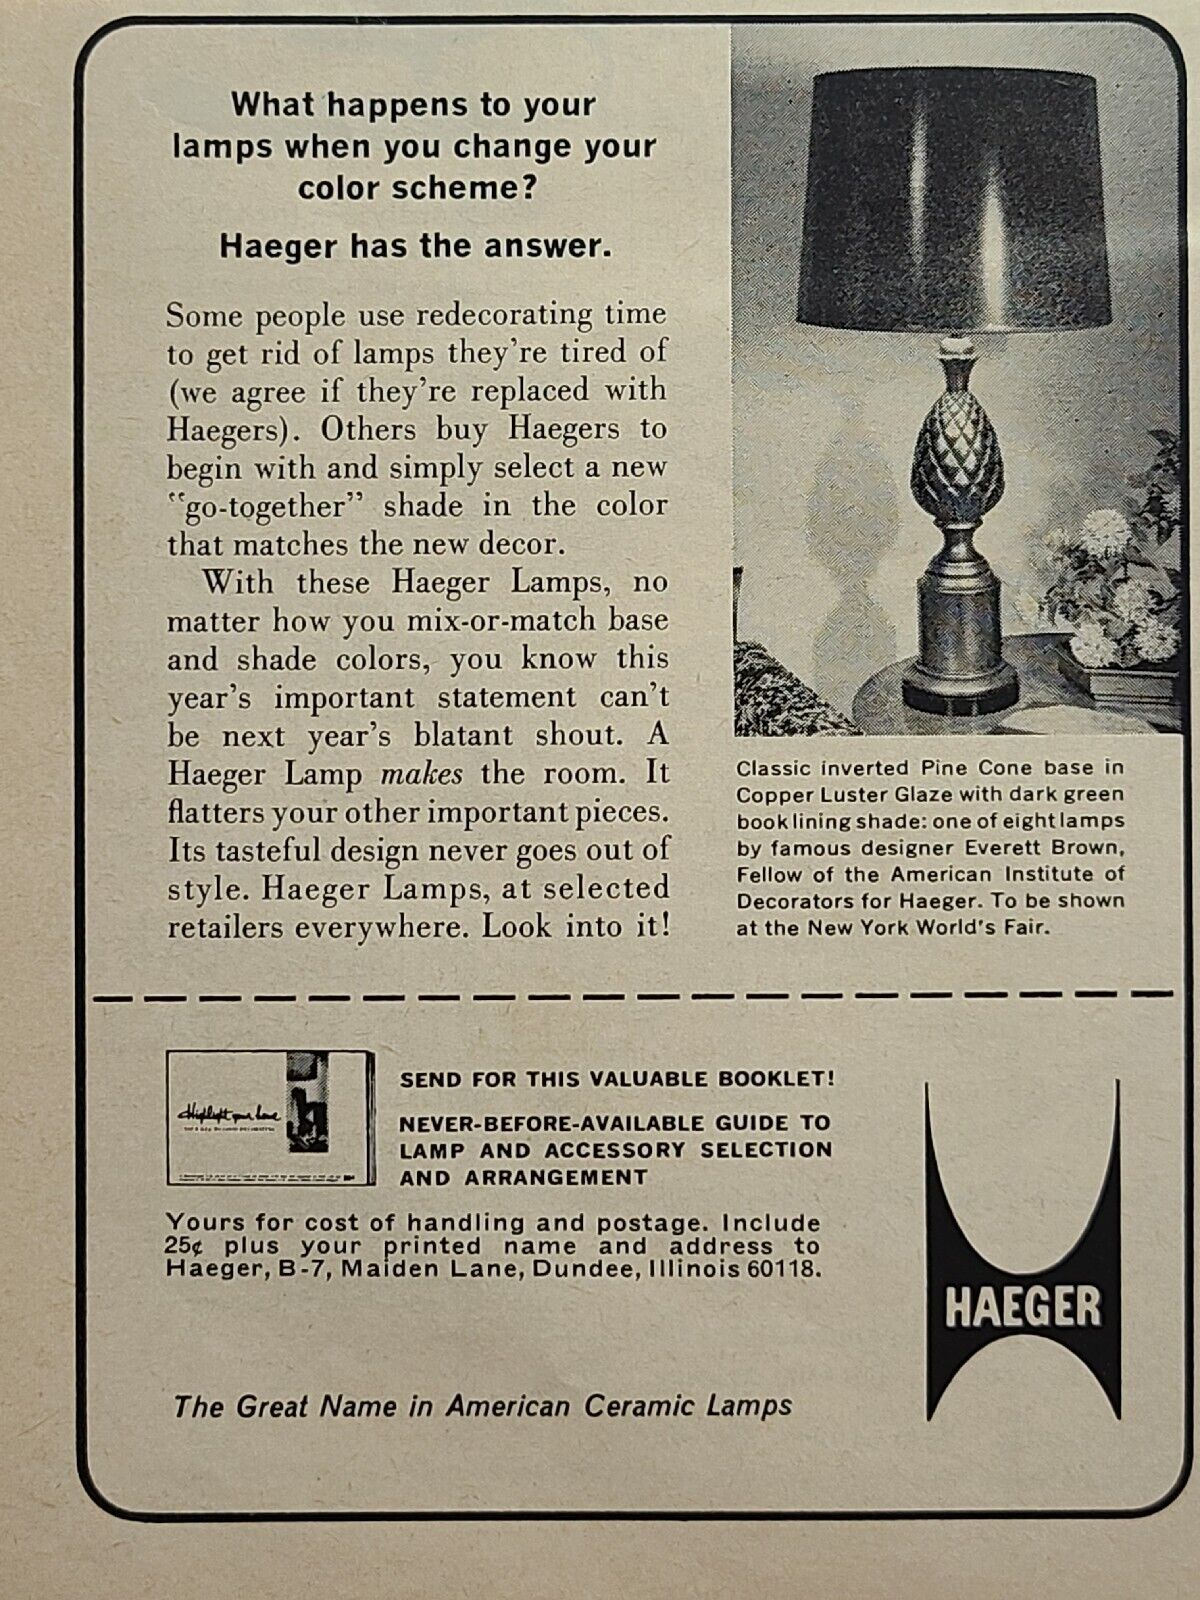 Haeger Great American Ceramic Lamps Dundee Illinois Vintage Print Ad 1964